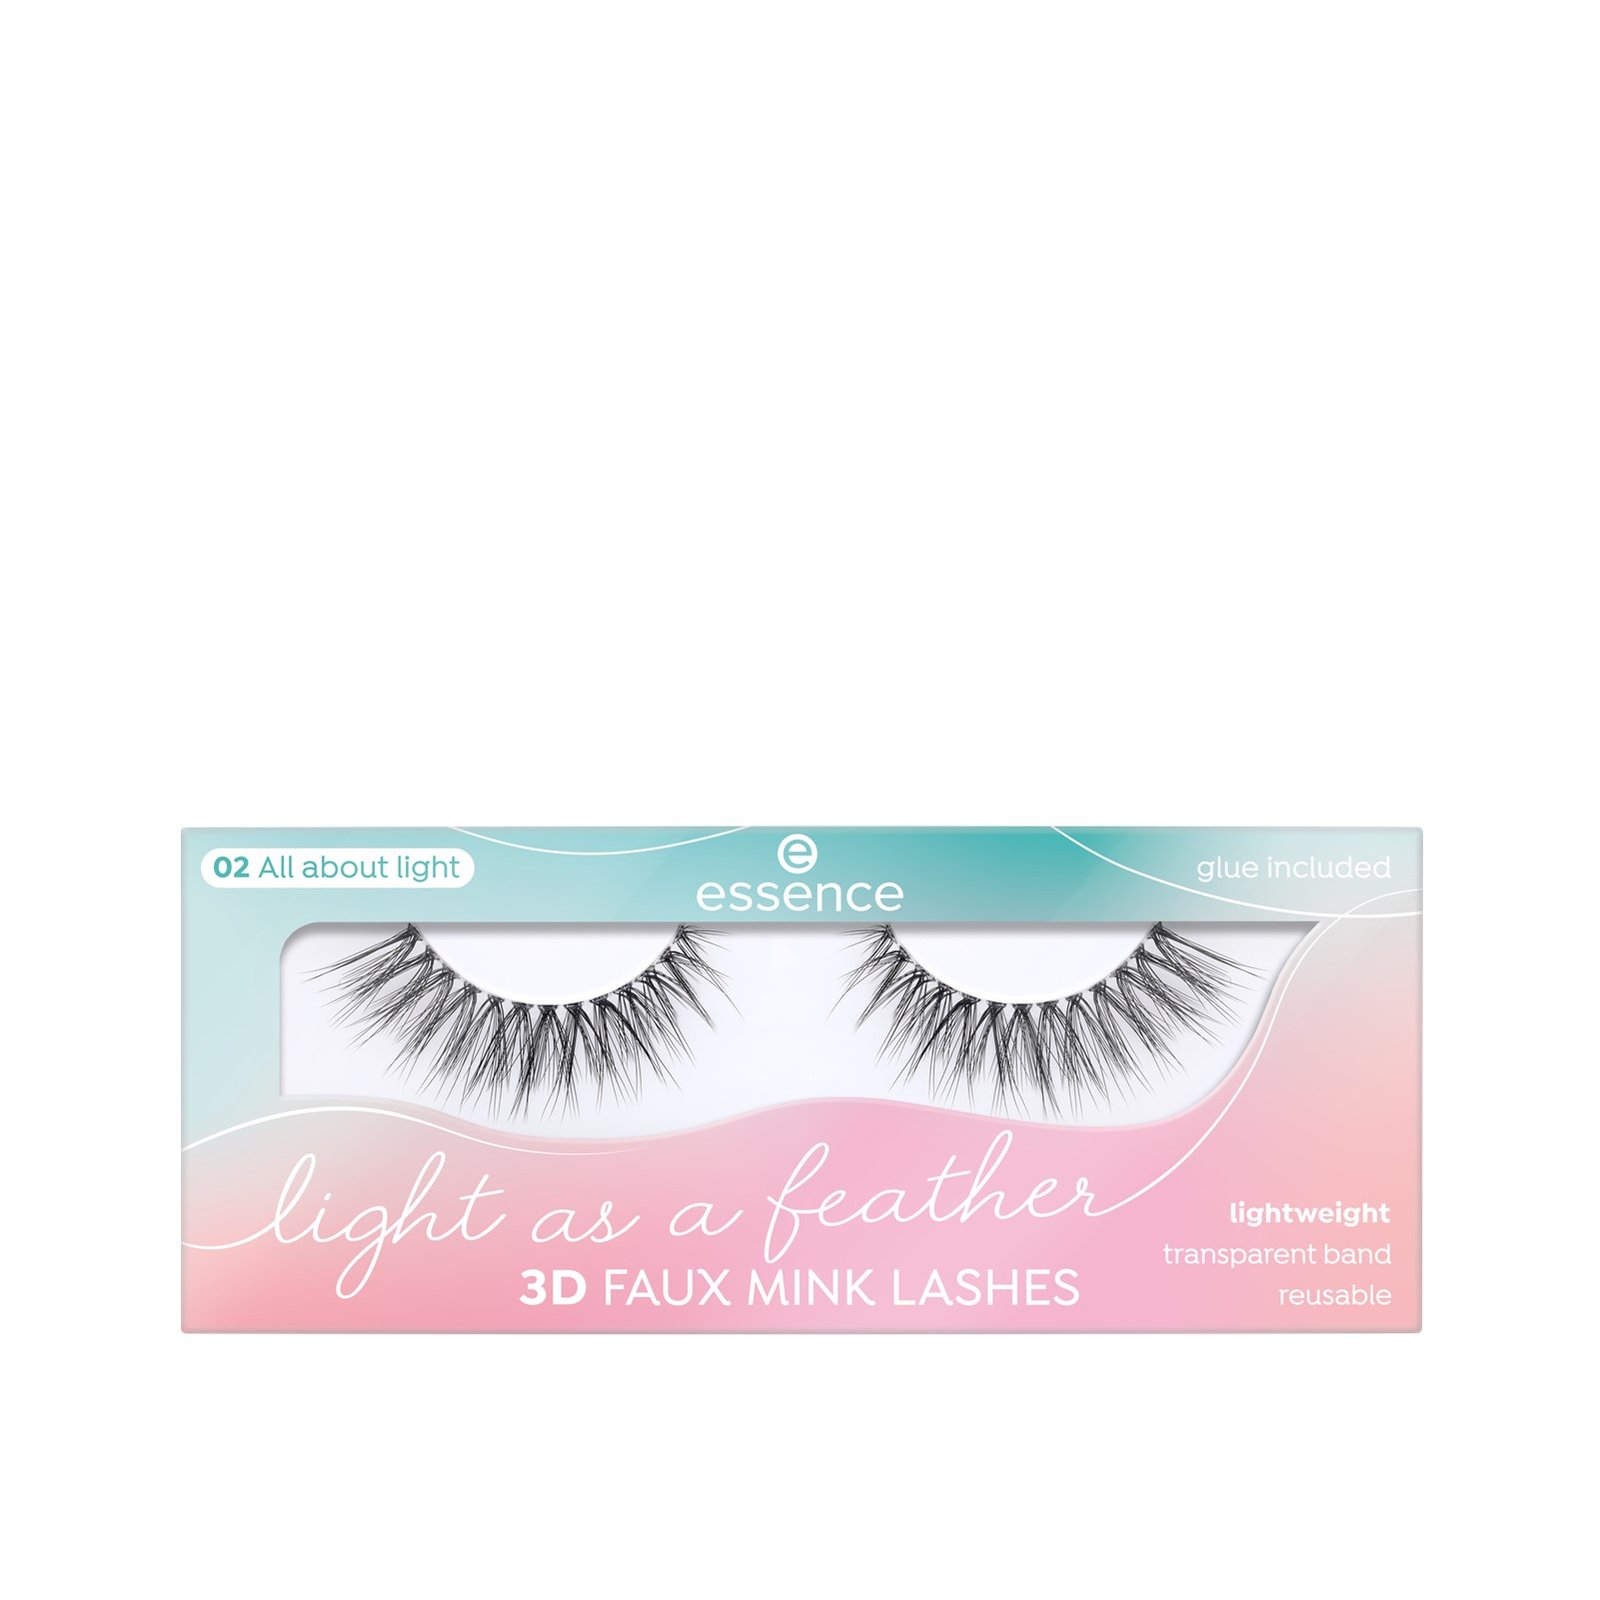 Light USA Faux · A Lashes 02 3D About Feather Buy As Light Mink All essence